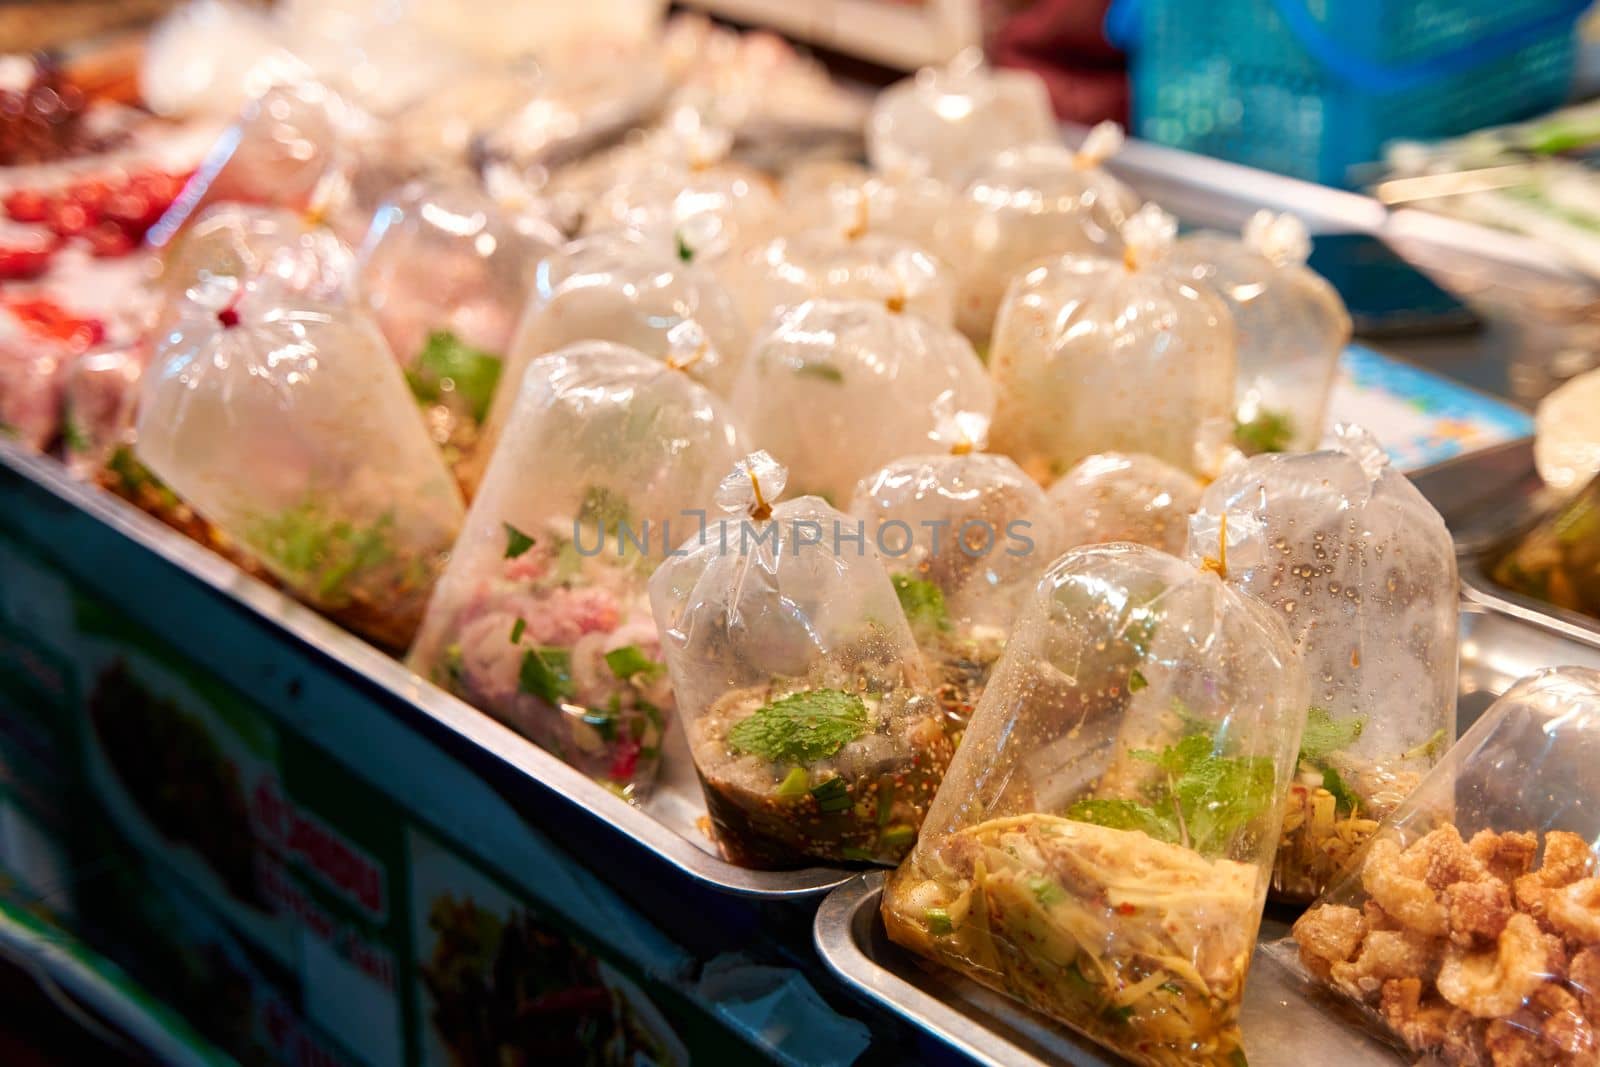 Bags of soup and liquid food at a street food market in Thailand.